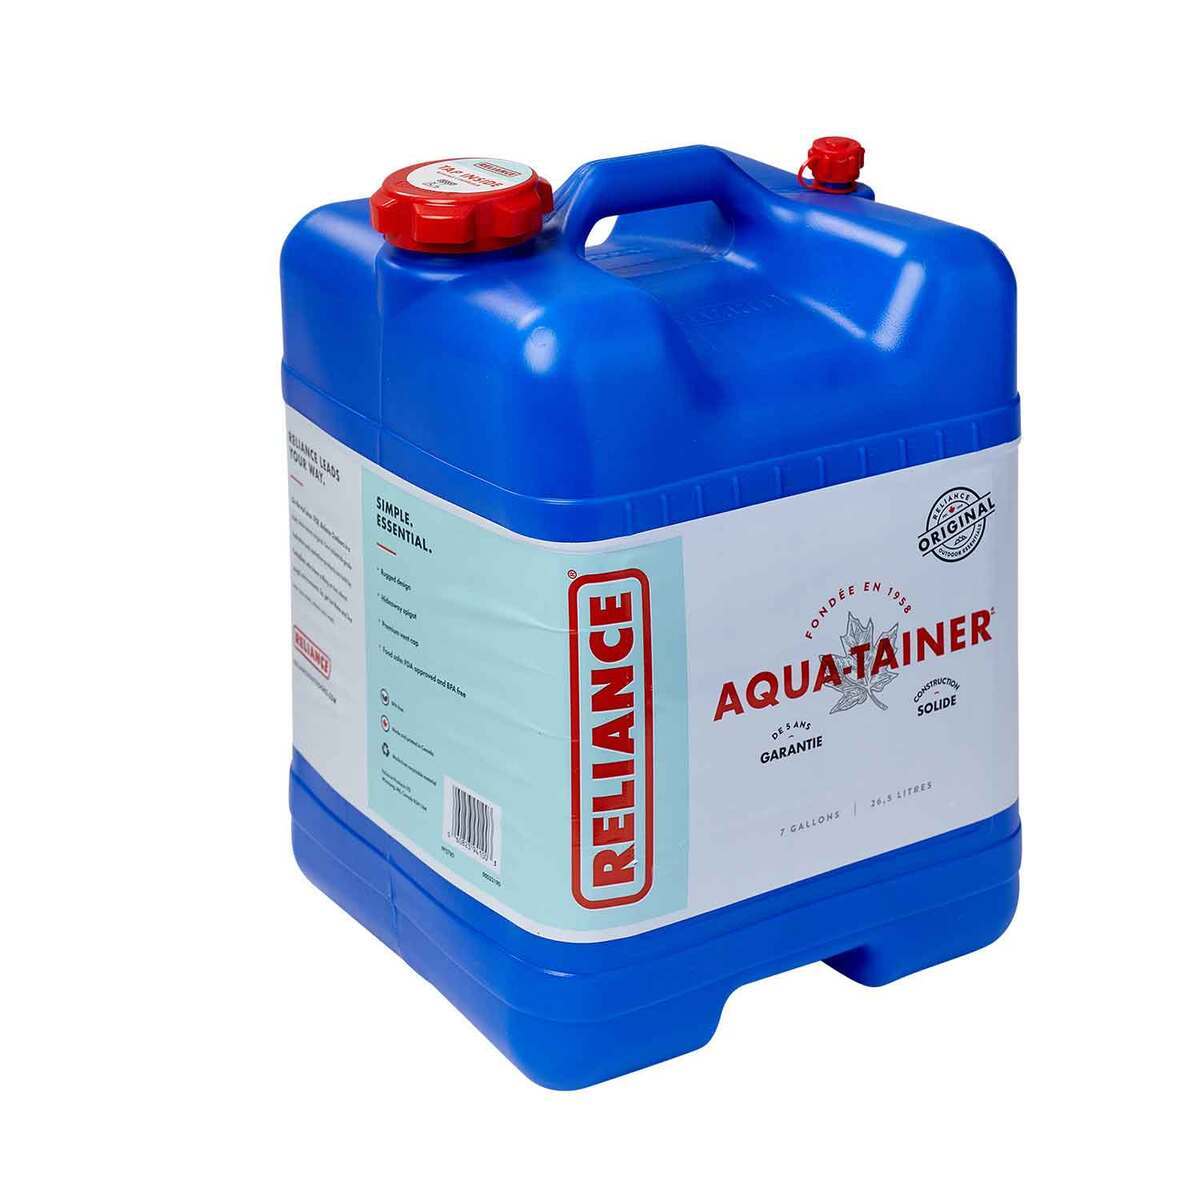 Reliance Aqua-Tainer 7 Gallon Water Container